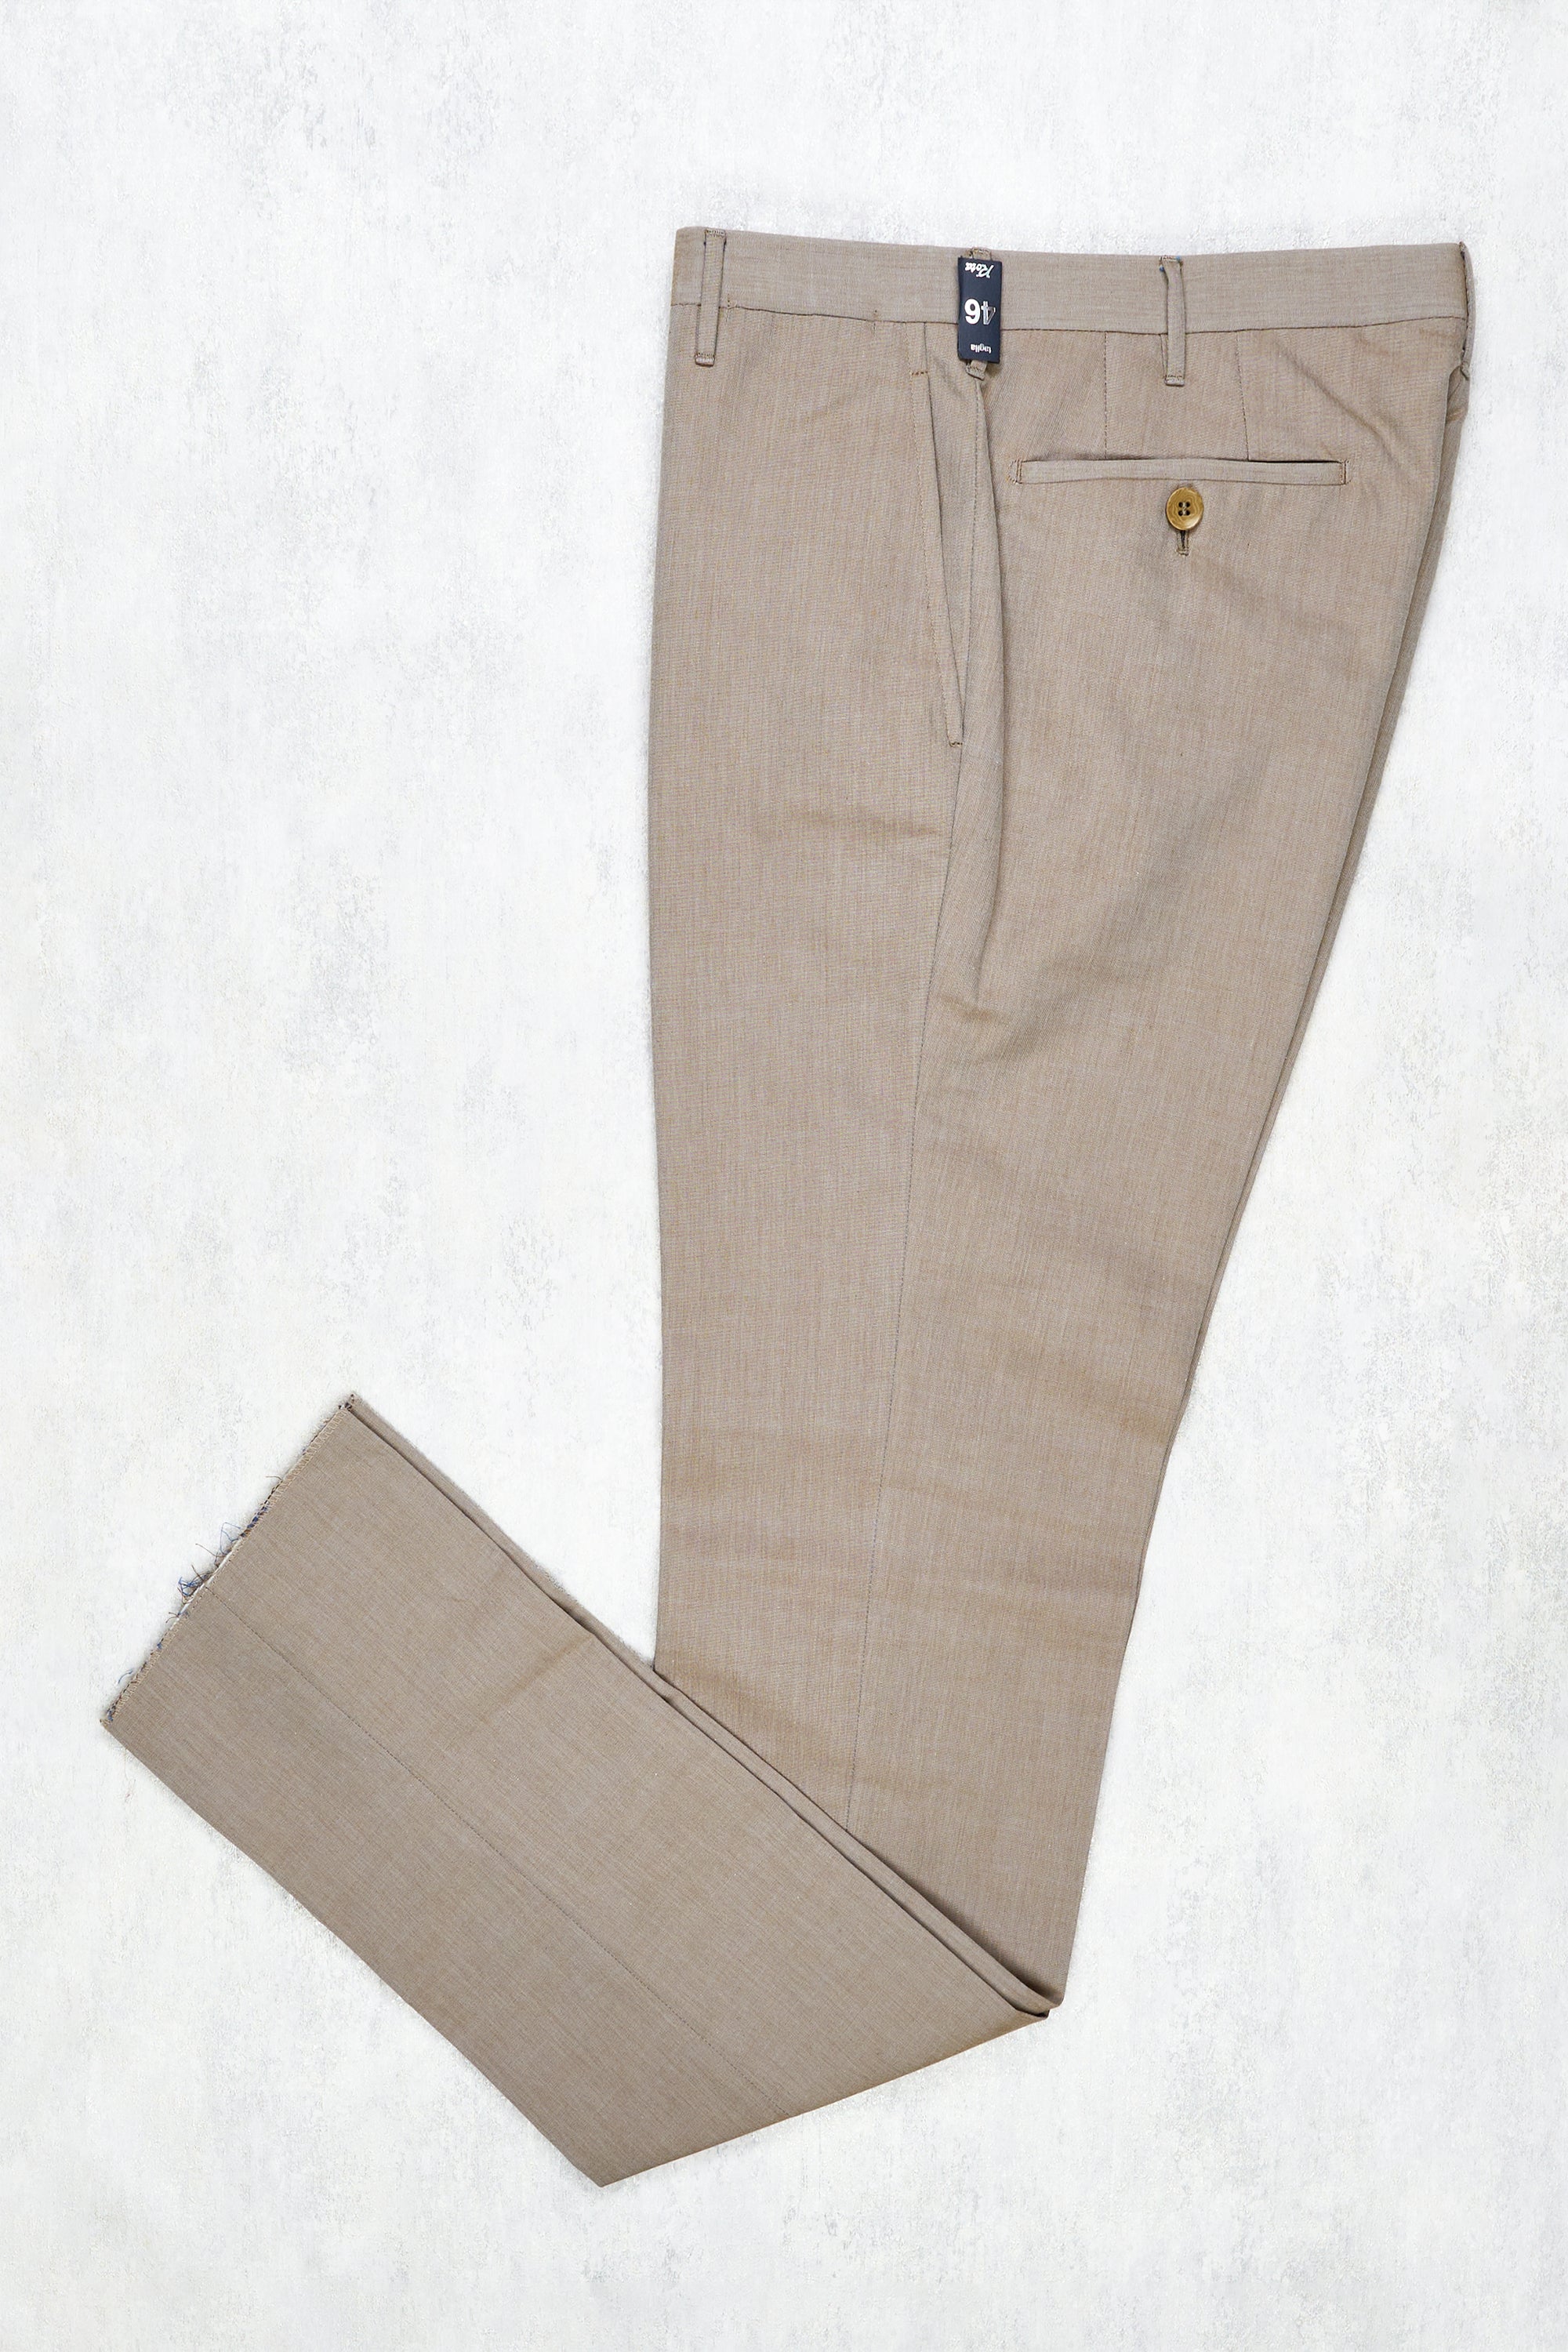 Rota	290/2 Brown Cotton Trousers